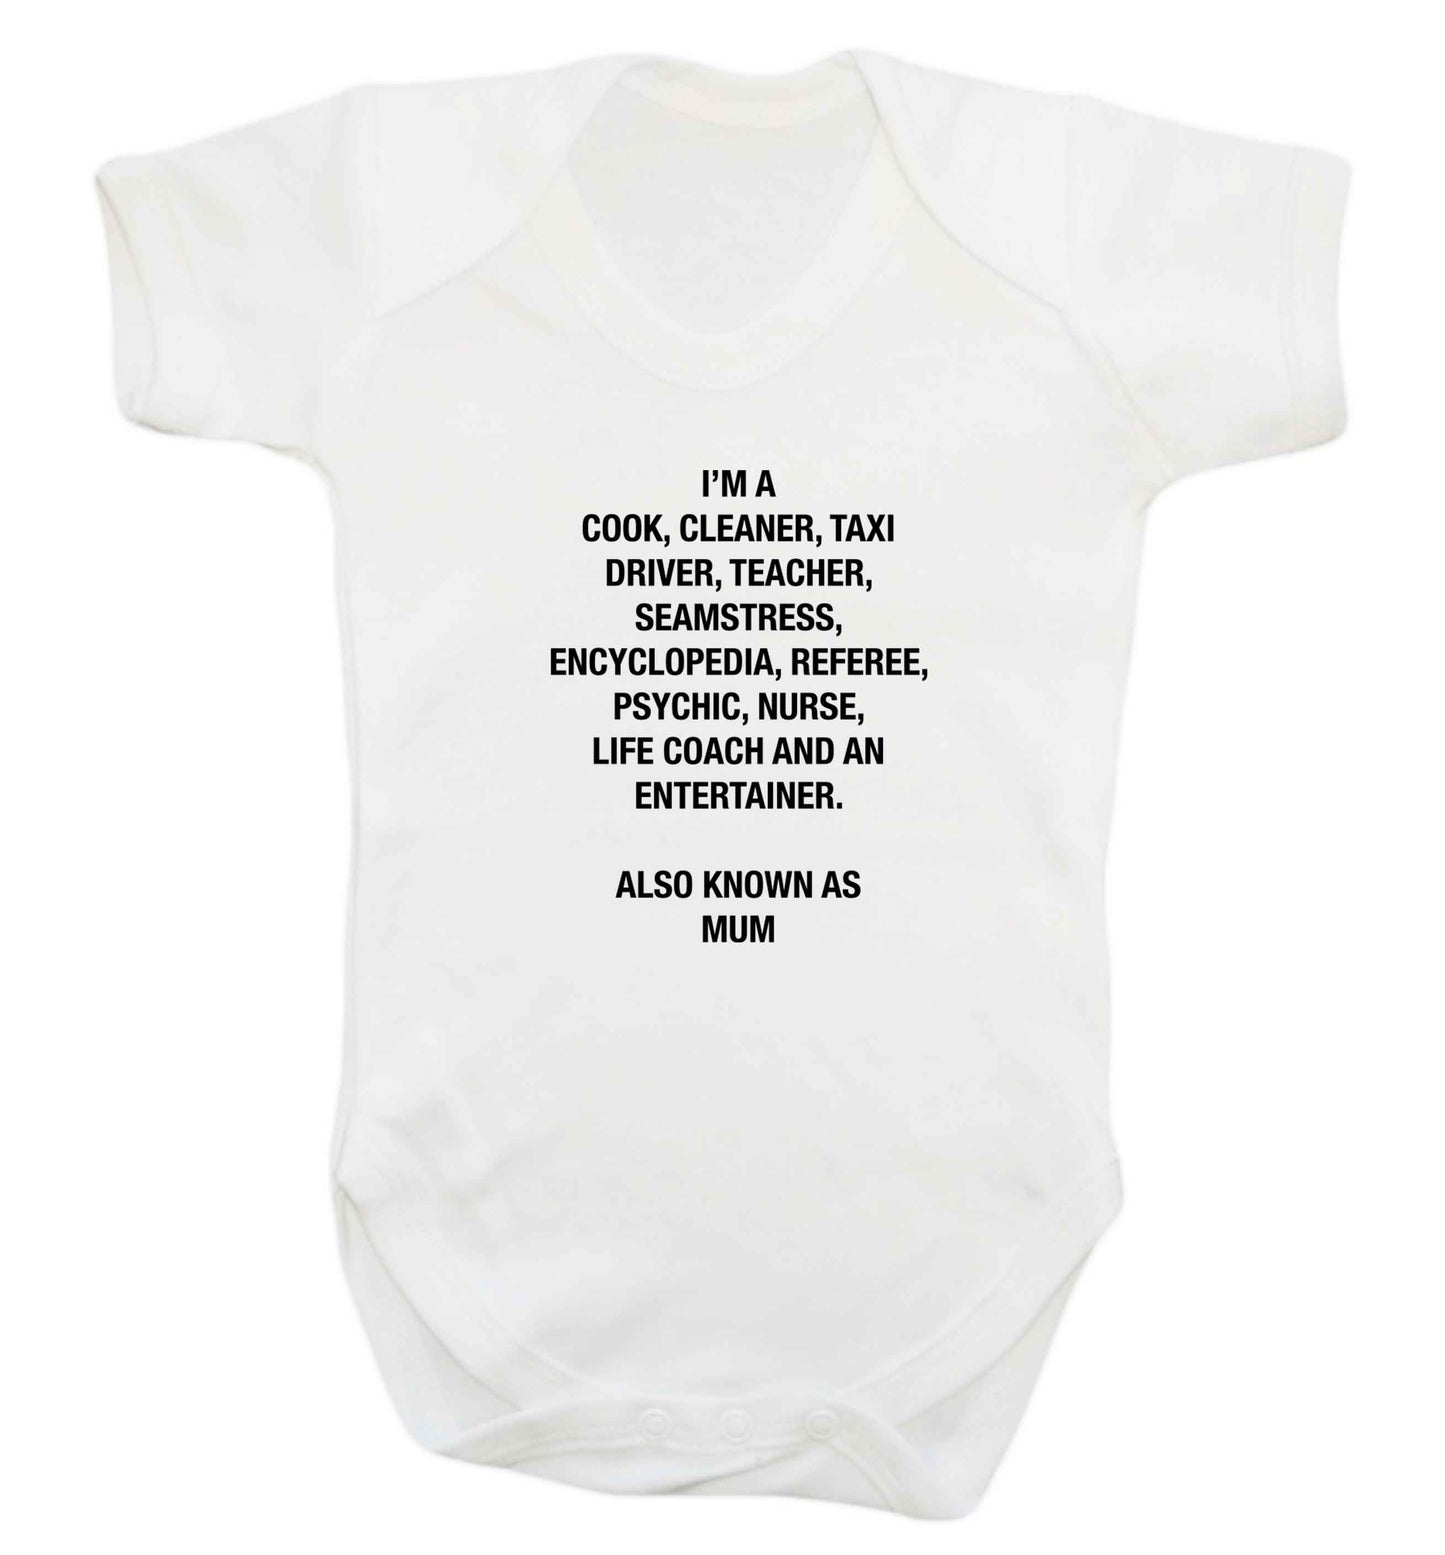 Funny gifts for your mum on mother's dayor her birthday! Mum, cook, cleaner, taxi driver, teacher, seamstress, encyclopedia, referee, psychic, nurse, life coach and entertainer baby vest white 18-24 months